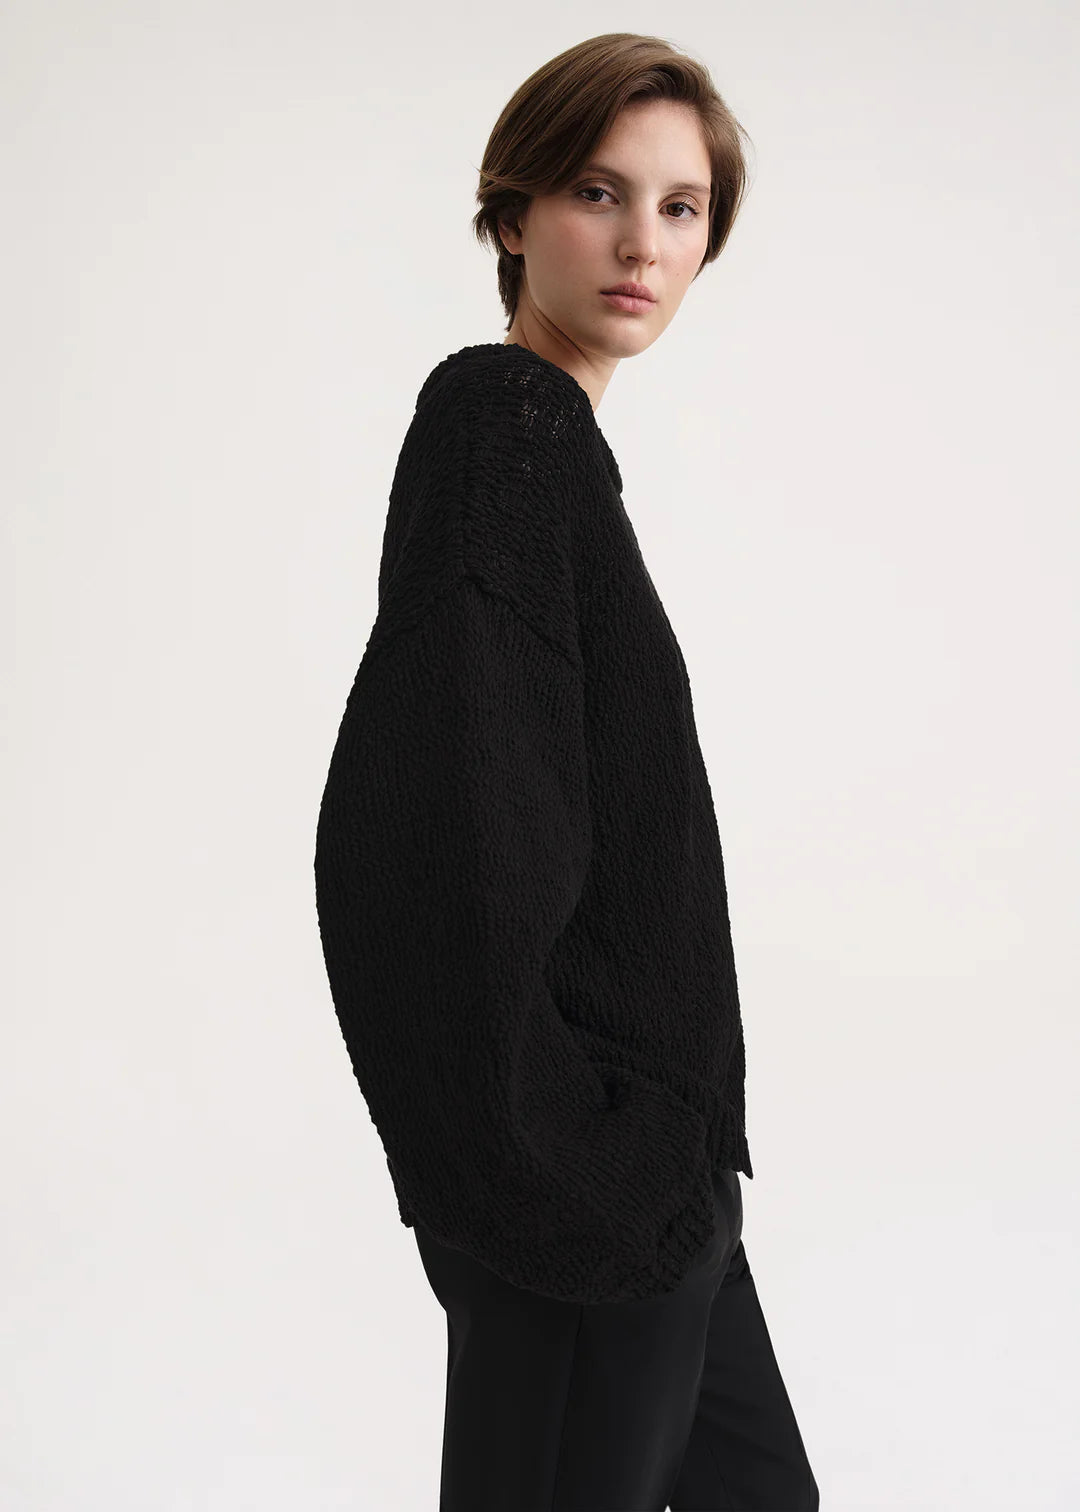 Structured Knit, Black, Sweater